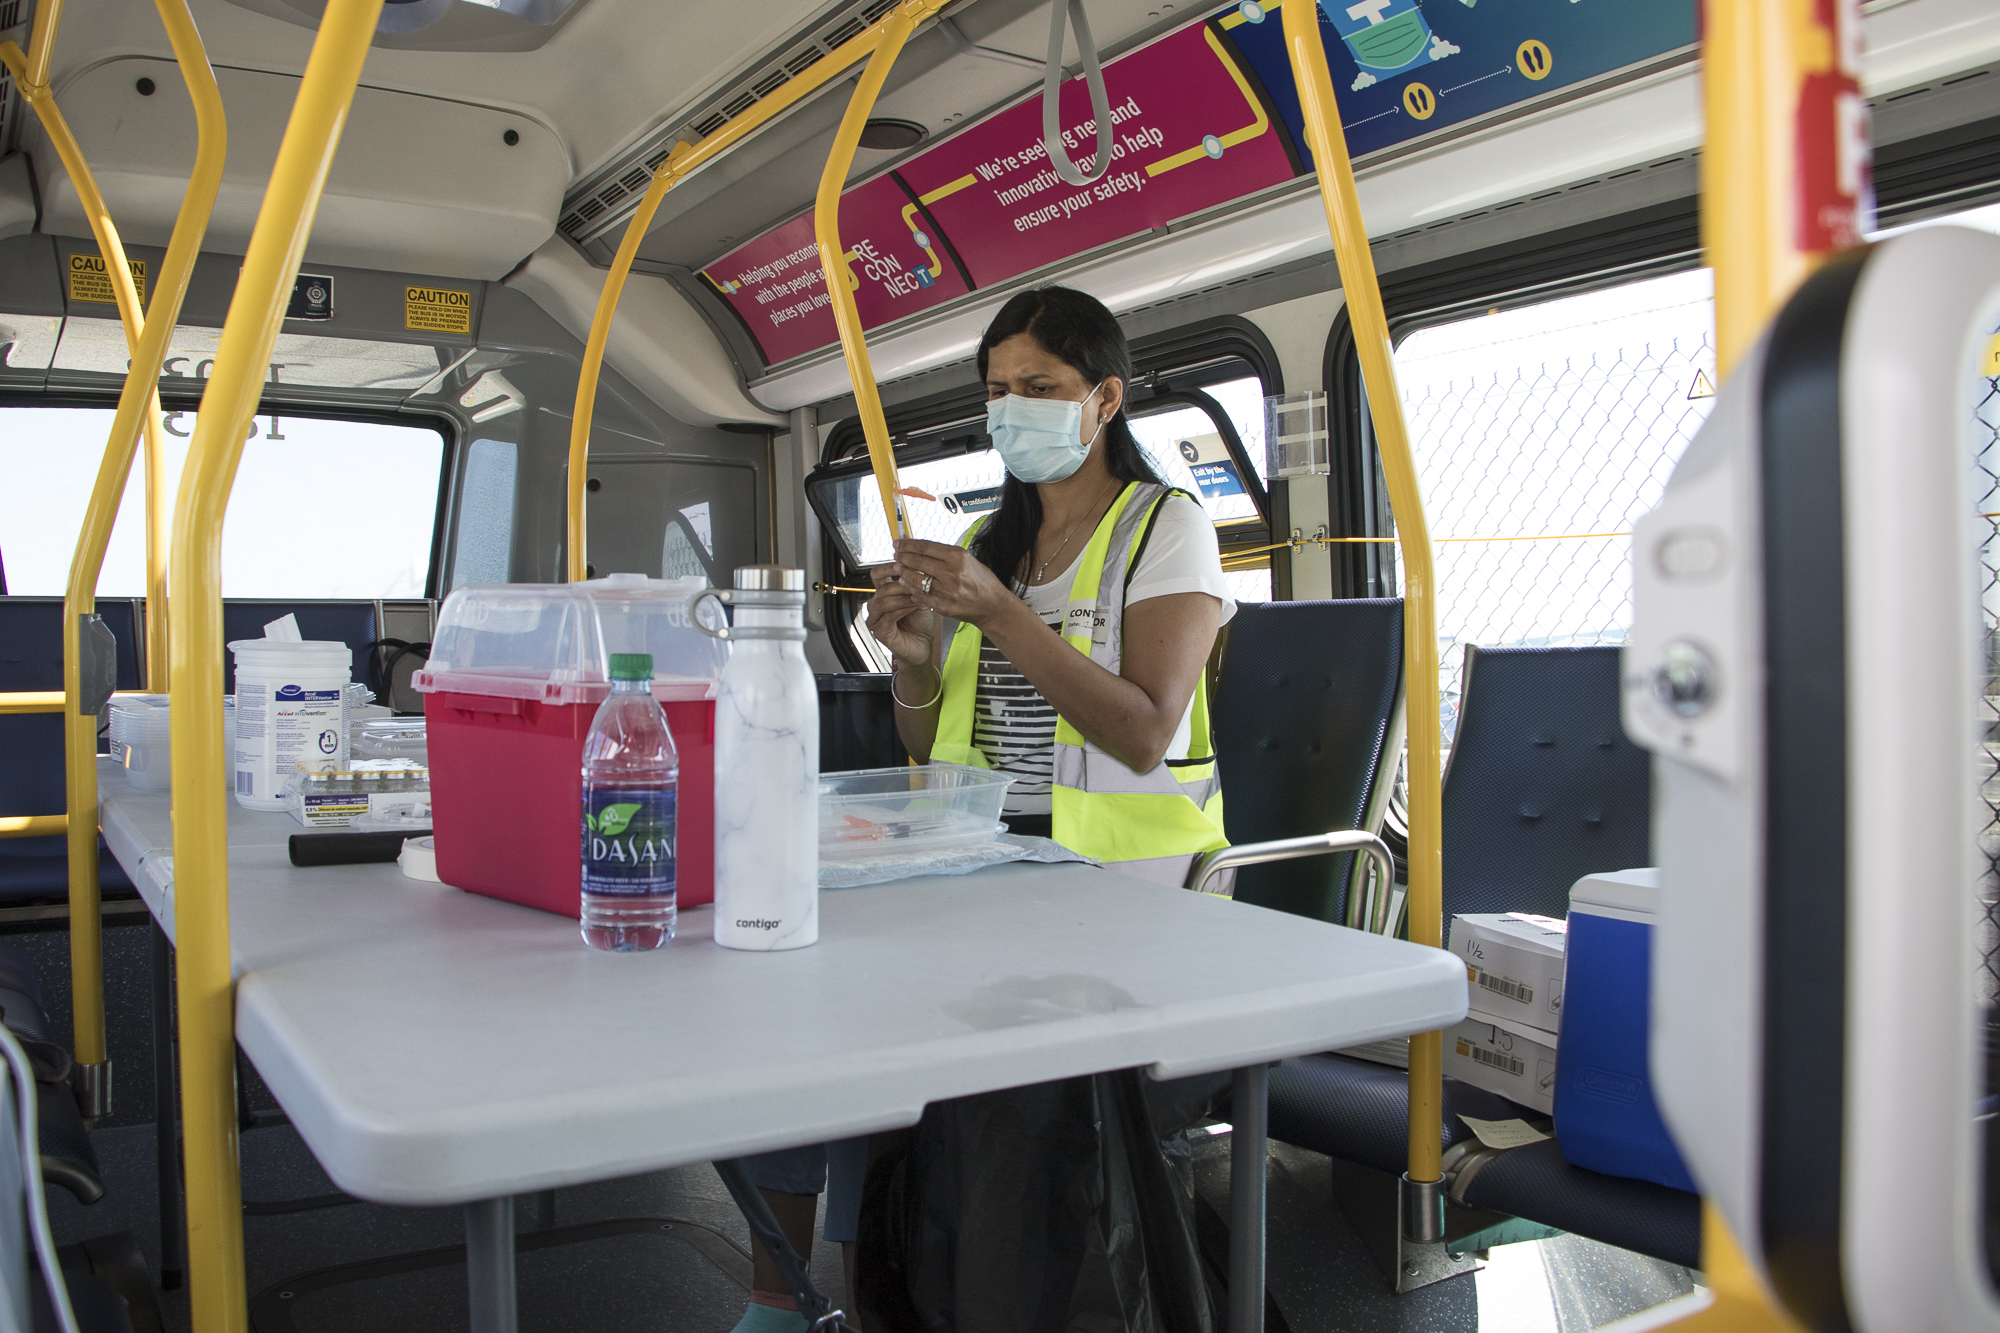 A Fraser Health nurse sits at the back of the bus preparing COVID-19 immunizations. She is masked and wearing a high visibility vest.